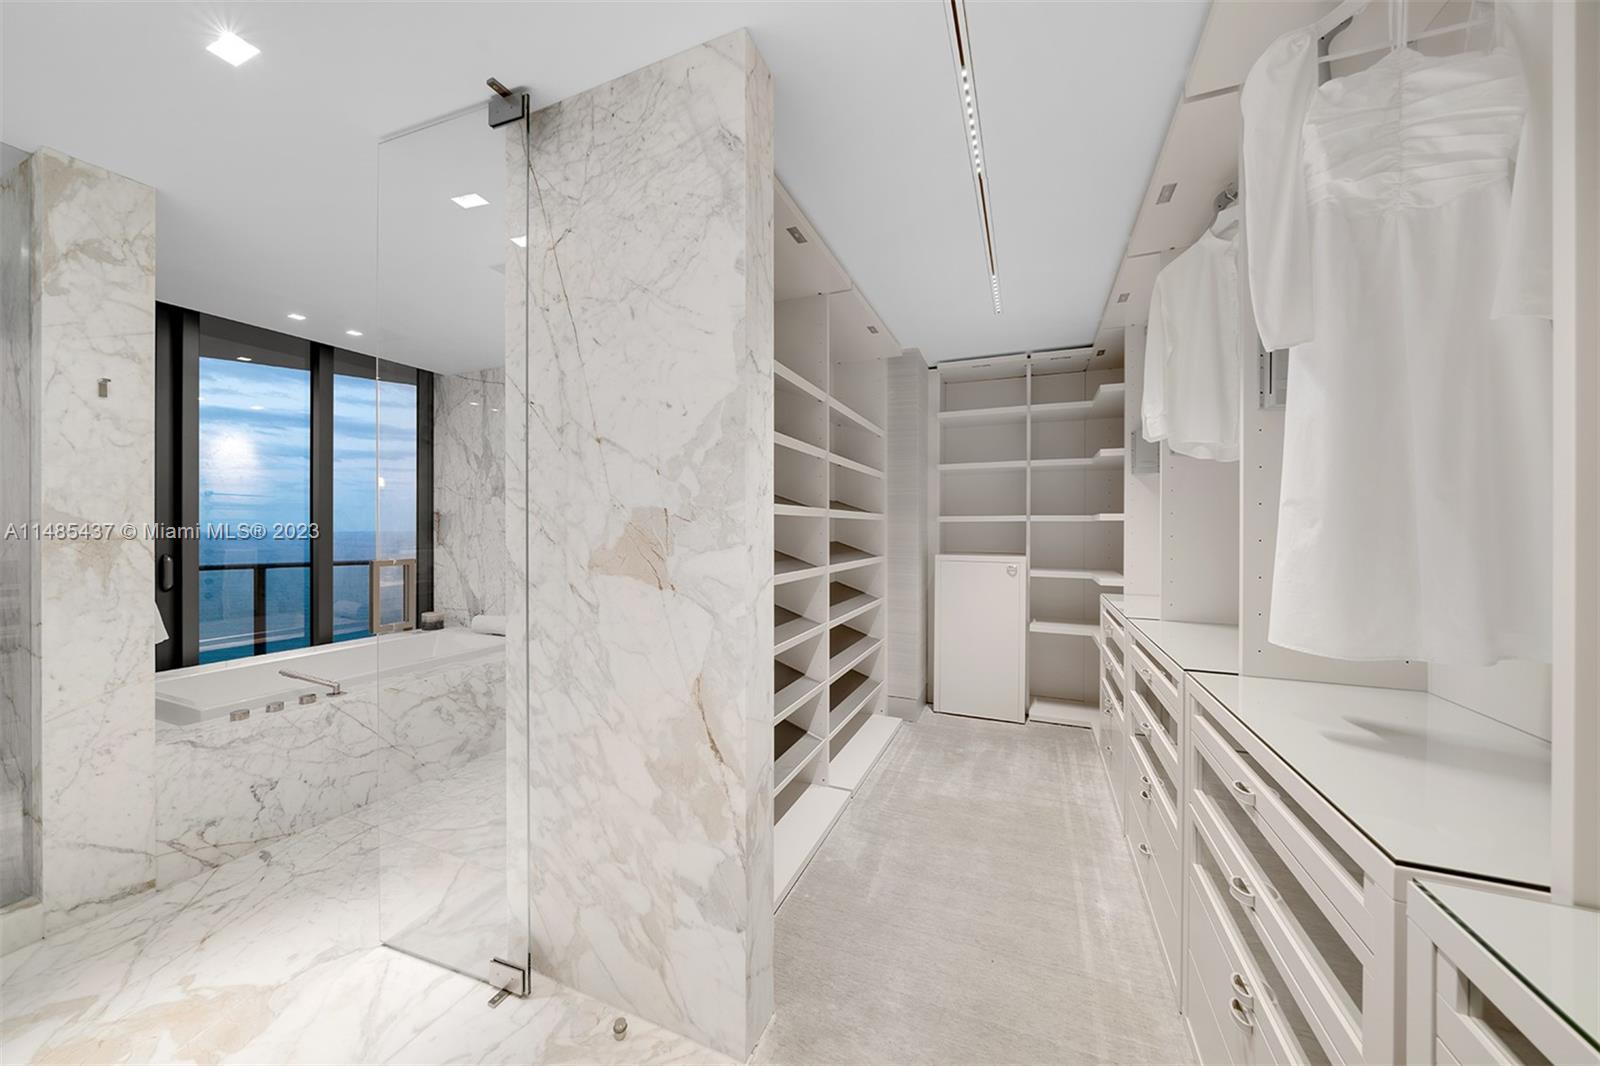 19575 Collins Ave Unit PH-43, Sunny Isles Beach, Florida, 33160, United States, 6 Bedrooms Bedrooms, ,8 BathroomsBathrooms,Residential,For Sale,19575 Collins Ave Unit PH-43,1401035